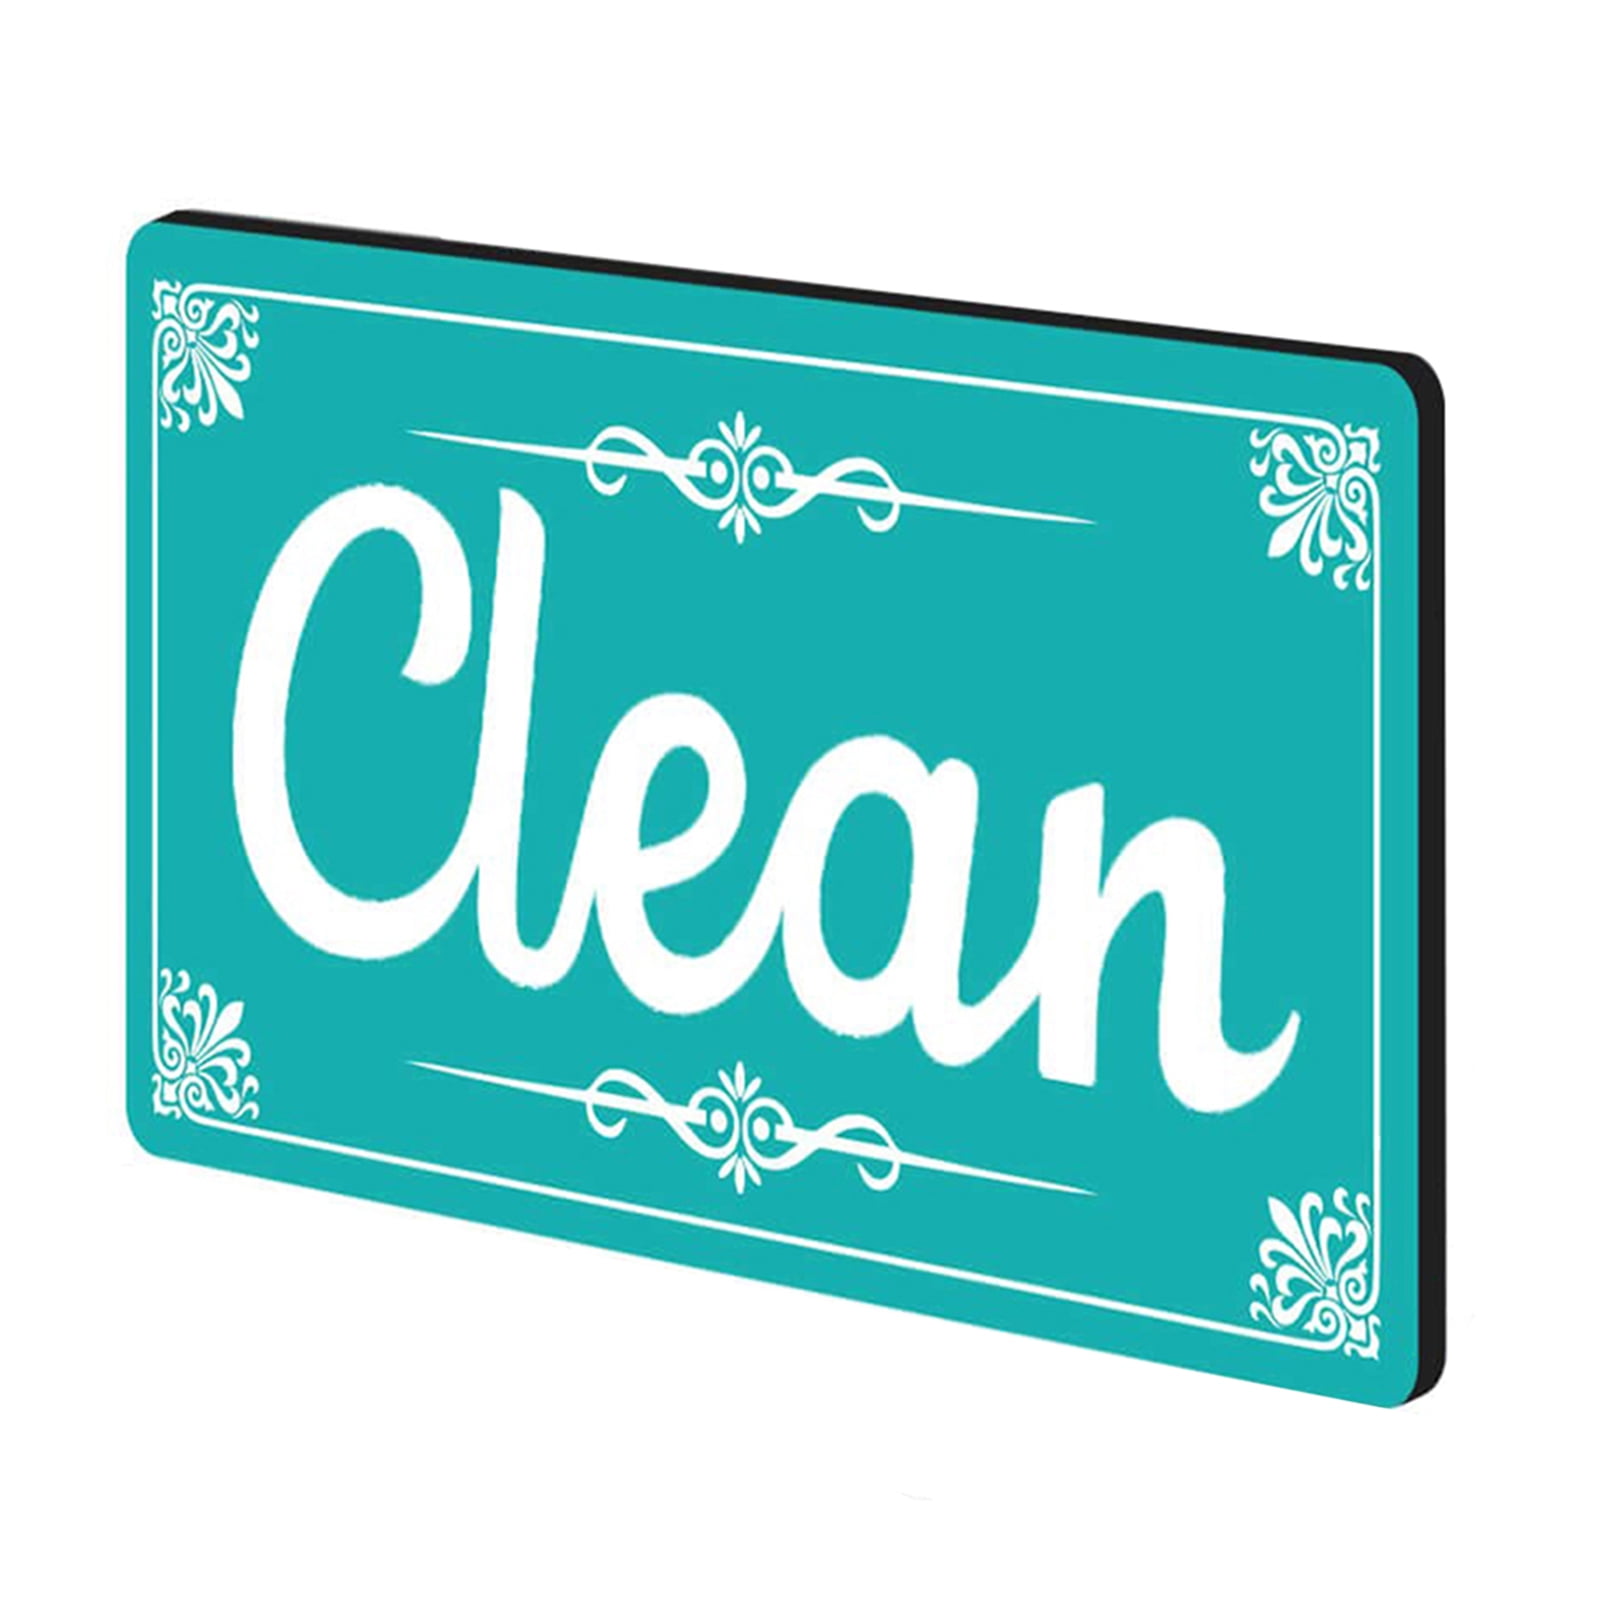 Clean/dirty dishwasher magnet – Bumble and Birch - Stationery and Gifts